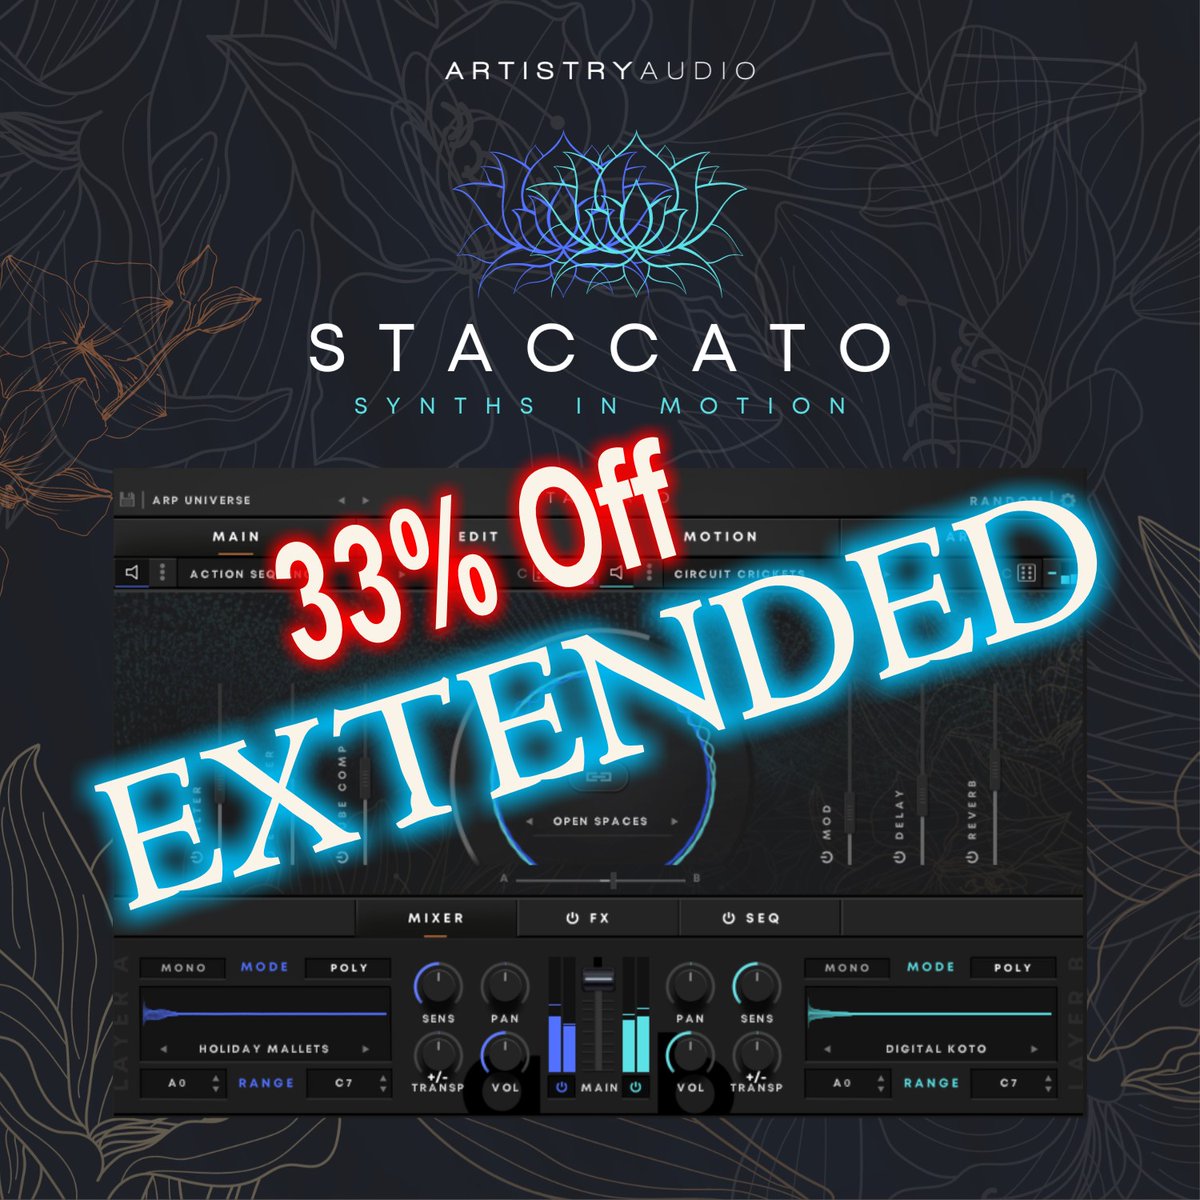 Staccato Intro Price Extended!
 🔥👉bit.ly/audioplugins
Only $99 intro price instead of $149 (Kontakt Free Player Instrument)
#musicproduction #staccato #plugindeals #plugindeals #musicsoftware  #virtualinstruments #vst #deal #deals #composer #producerlife #musicproducer